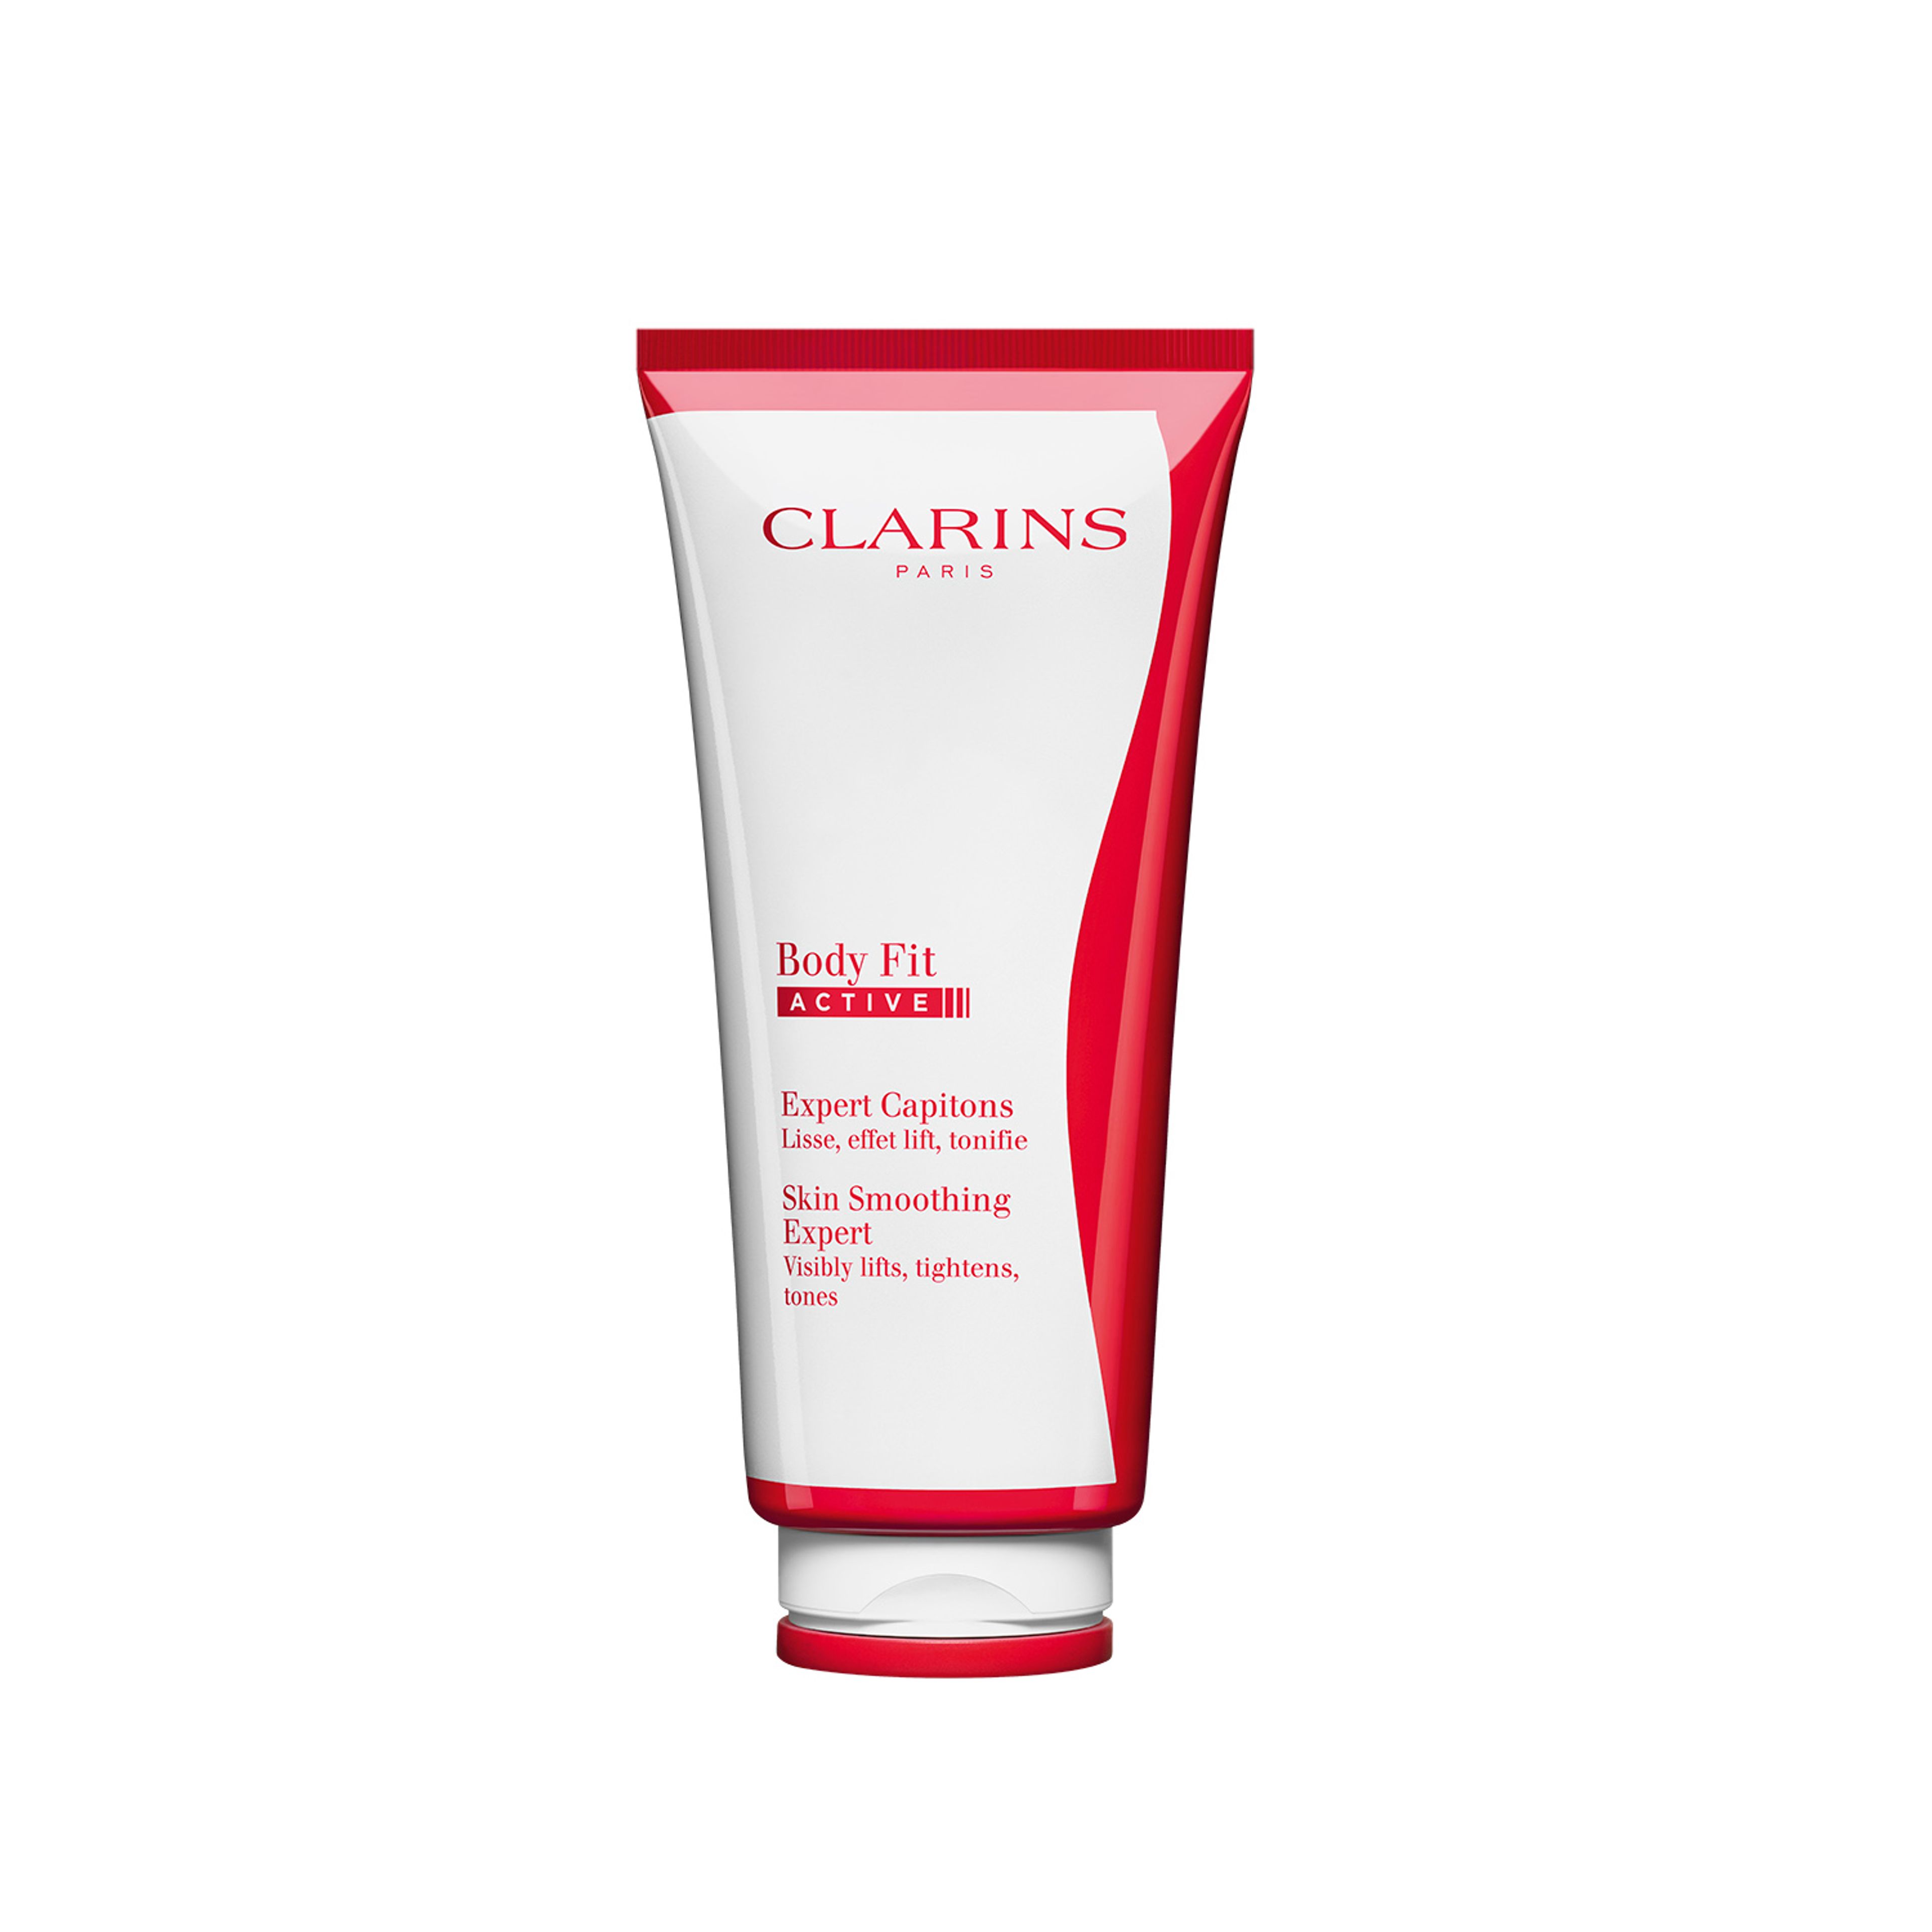 Clarins Body Fit Active 1